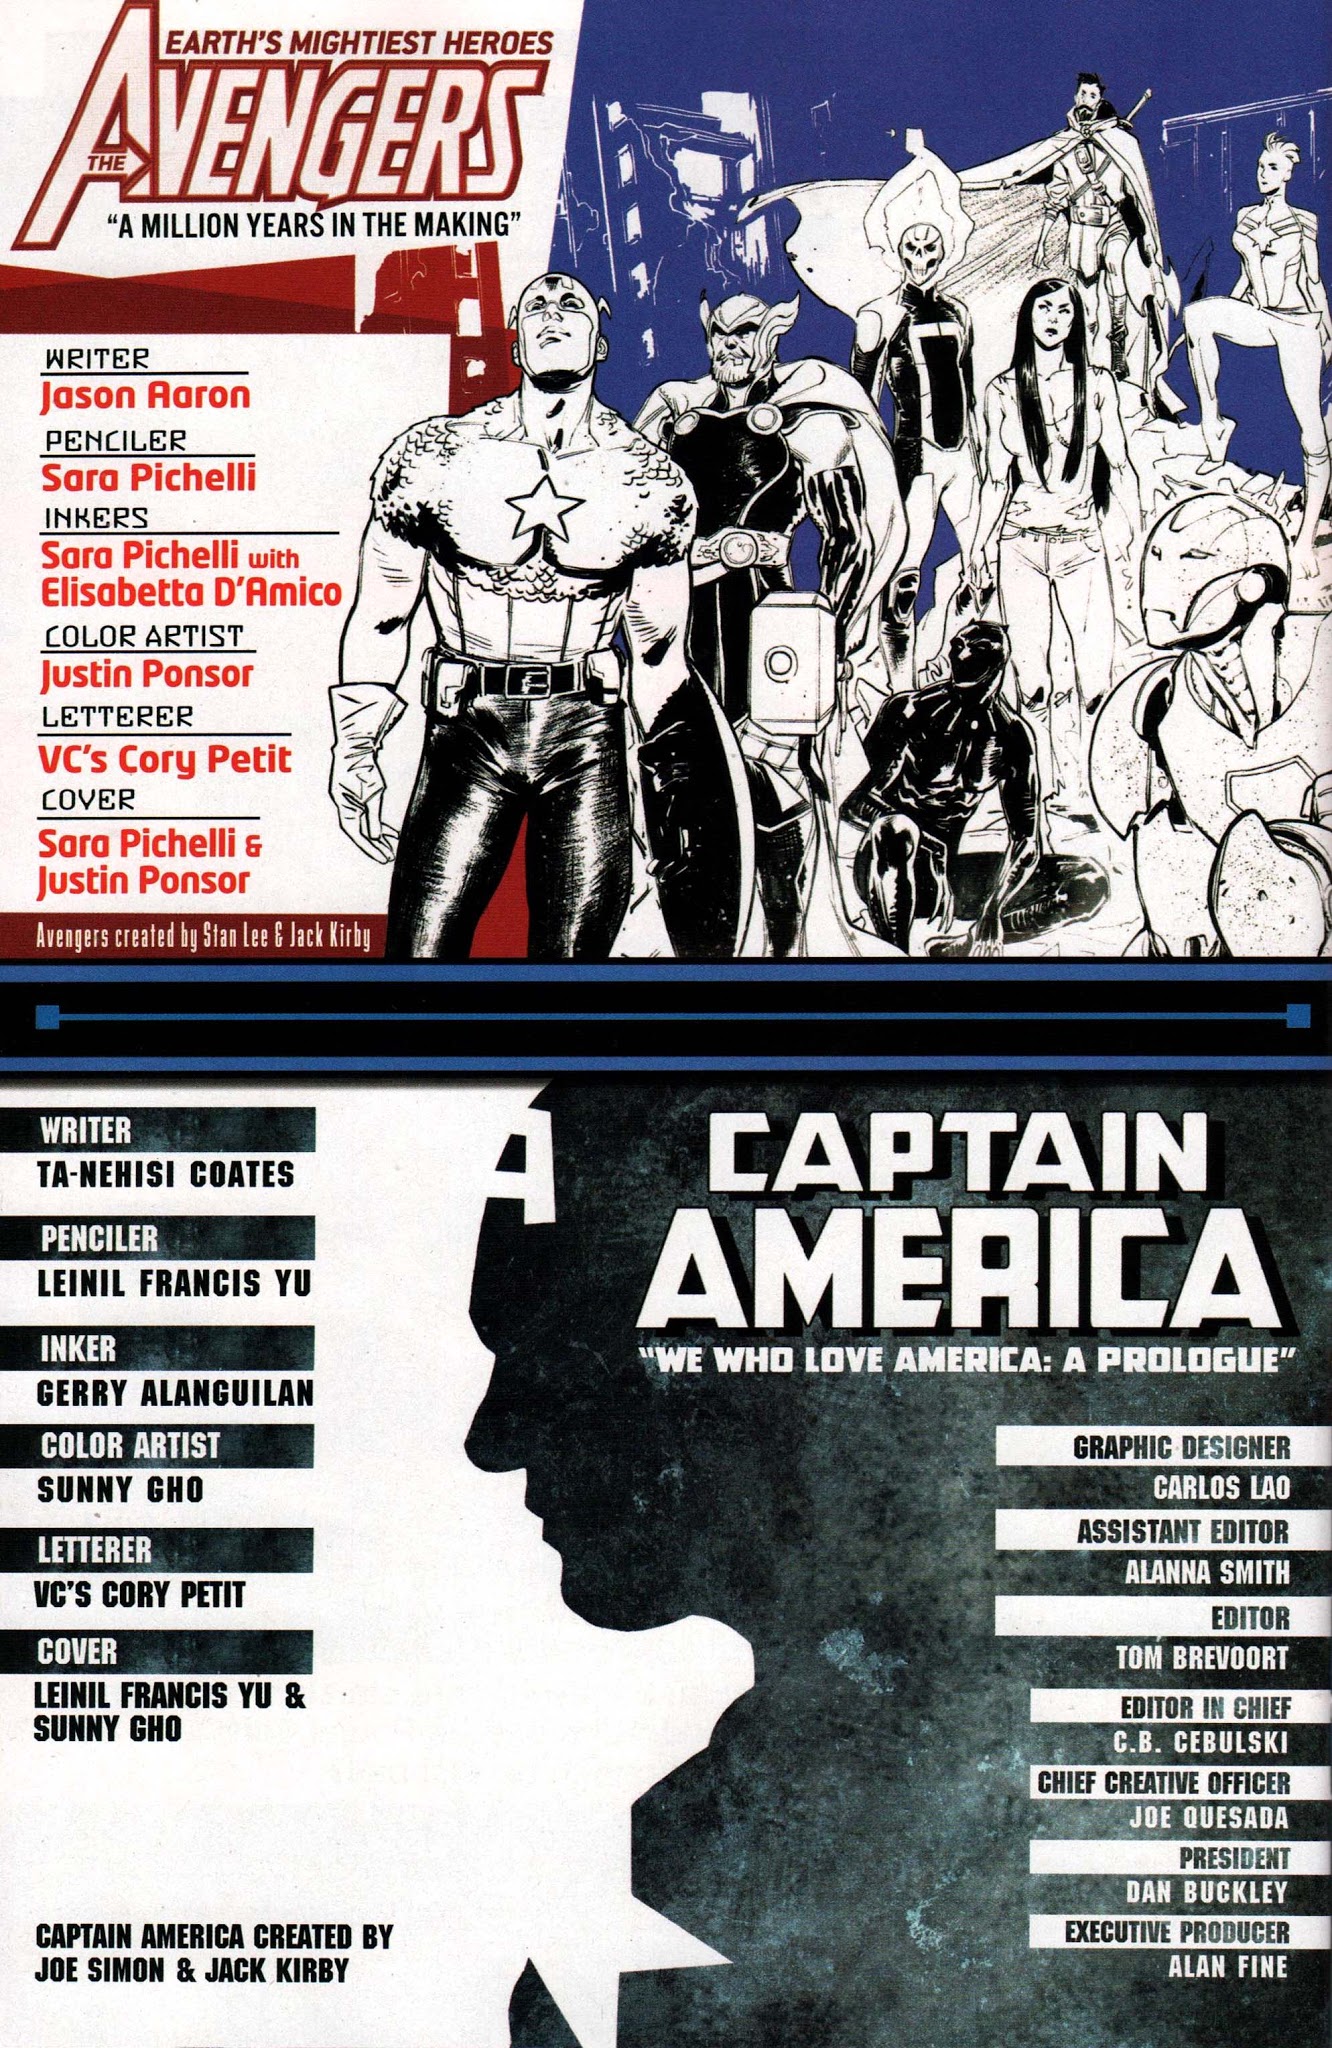 Read online Free Comic Book Day 2018 comic -  Issue # Avengers - Captain America - 30